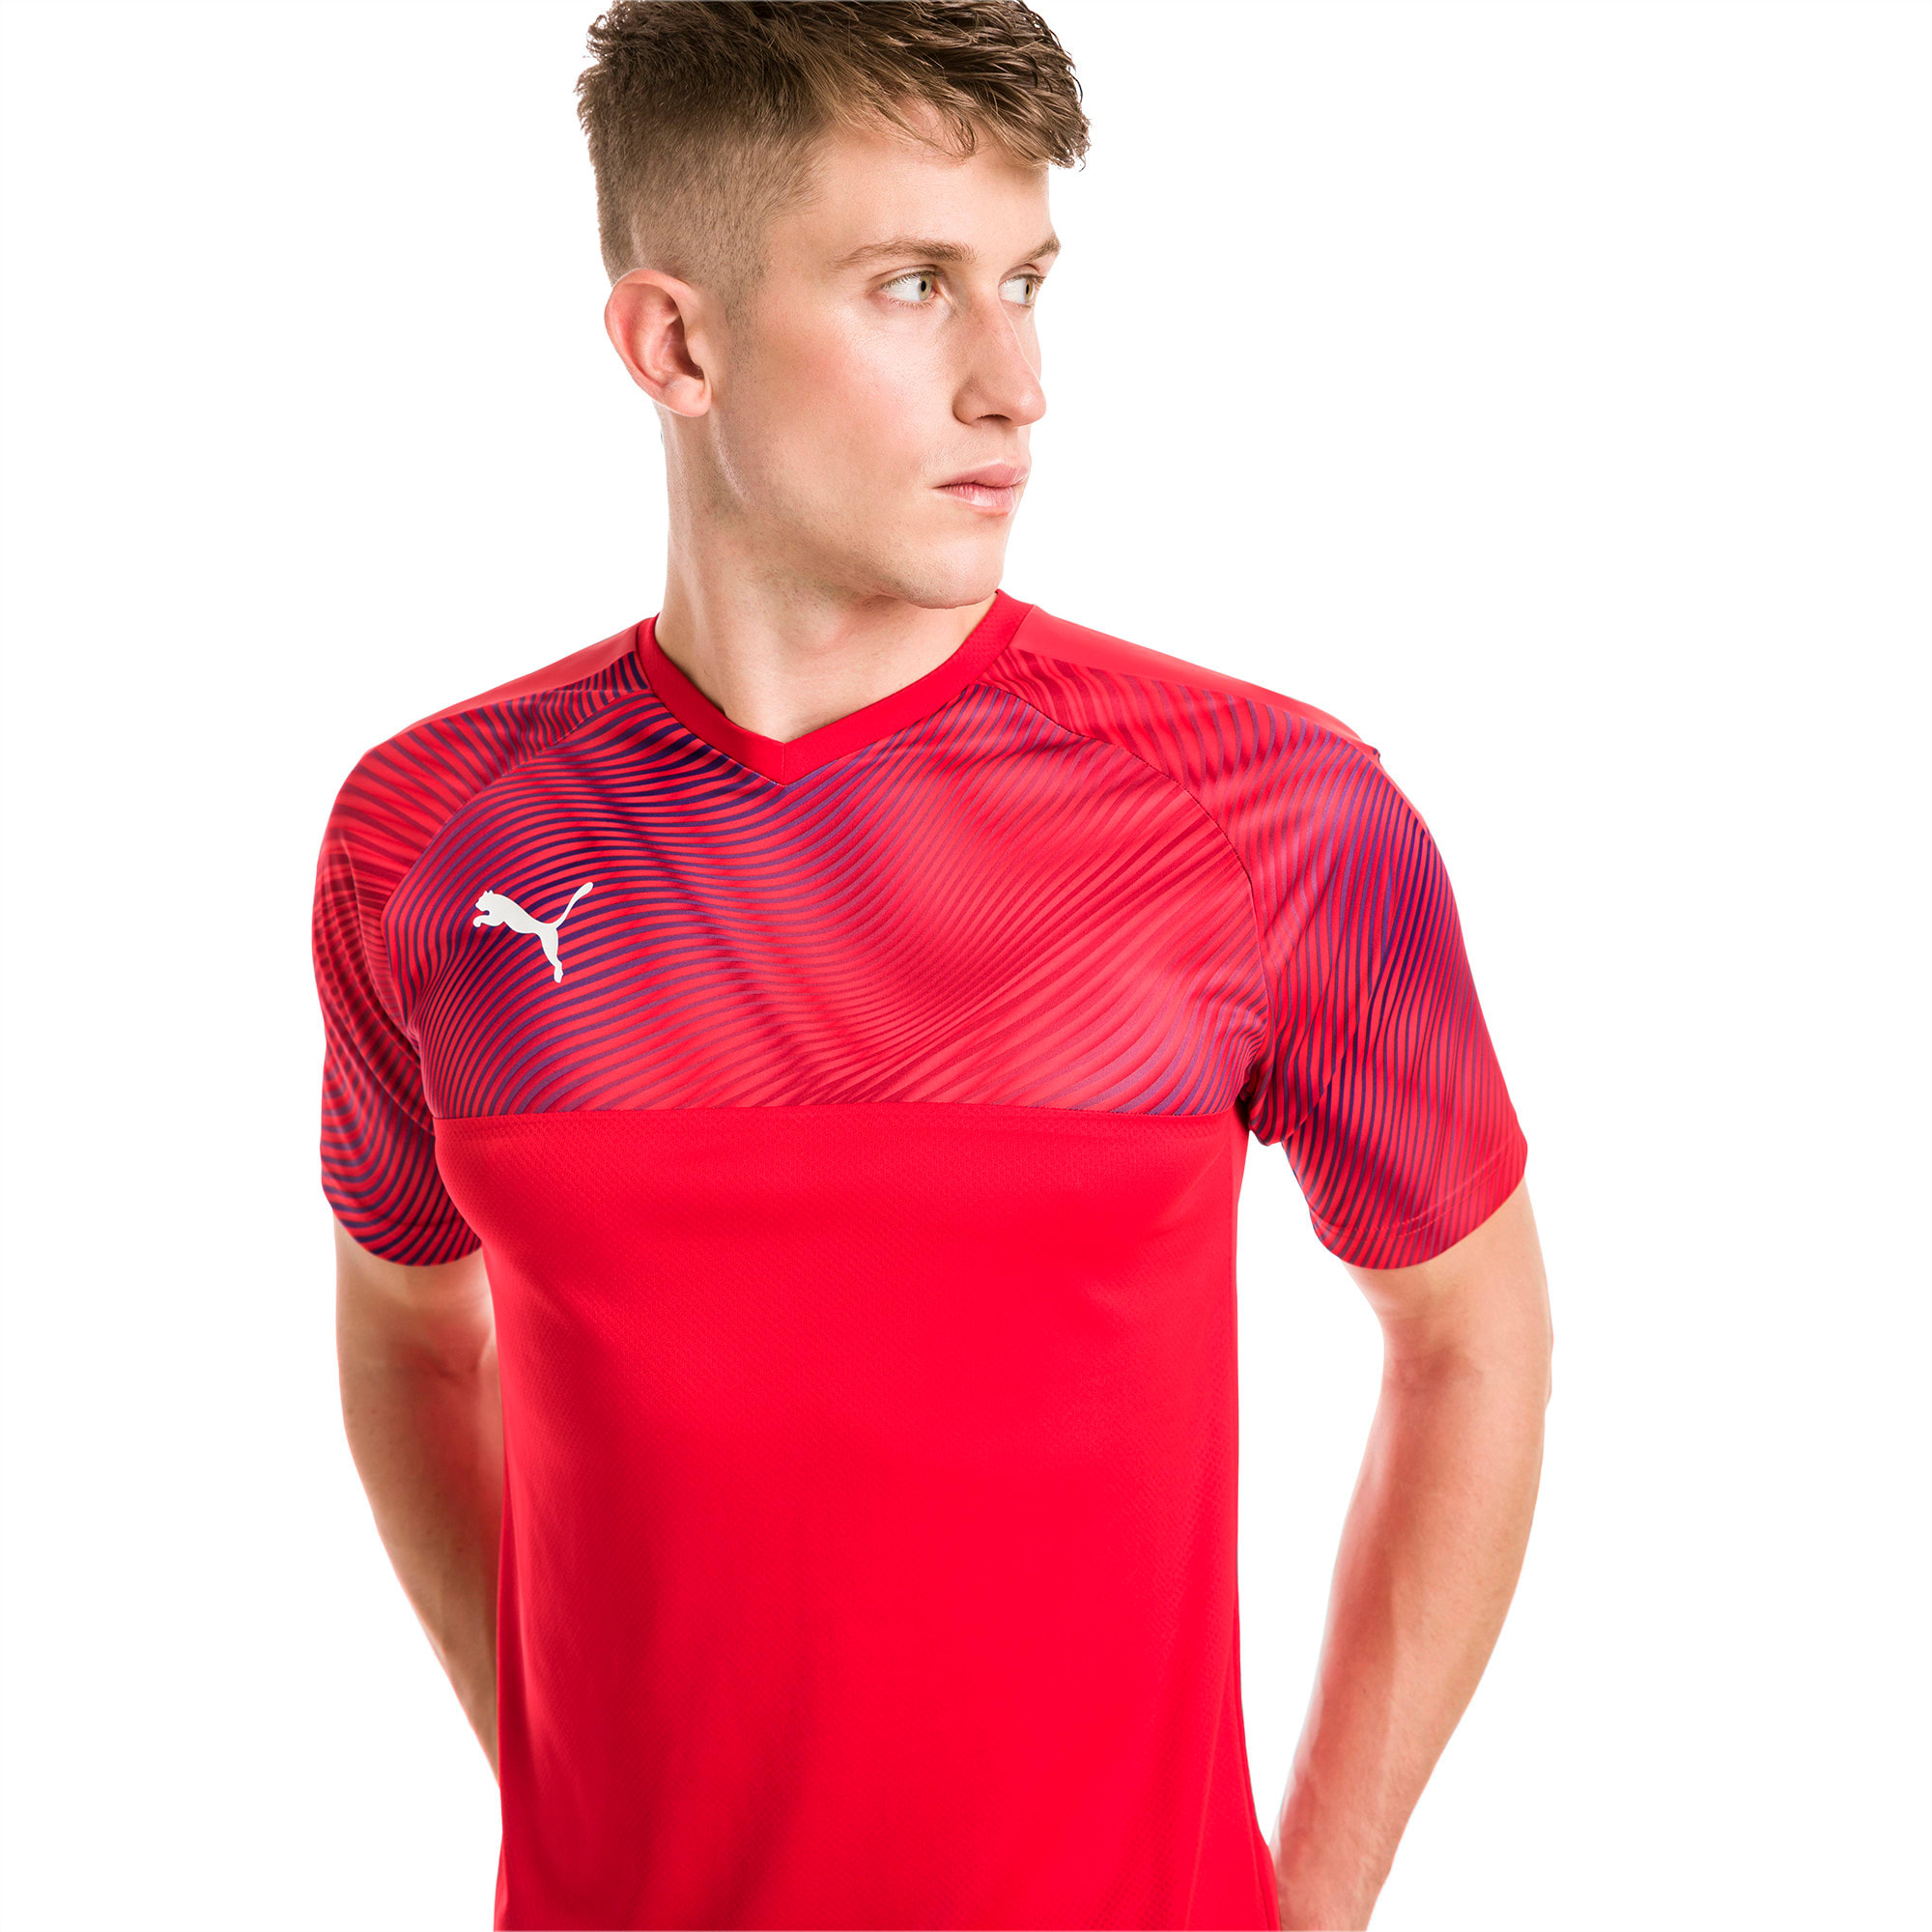 CUP dryCELL Men's Football Jersey